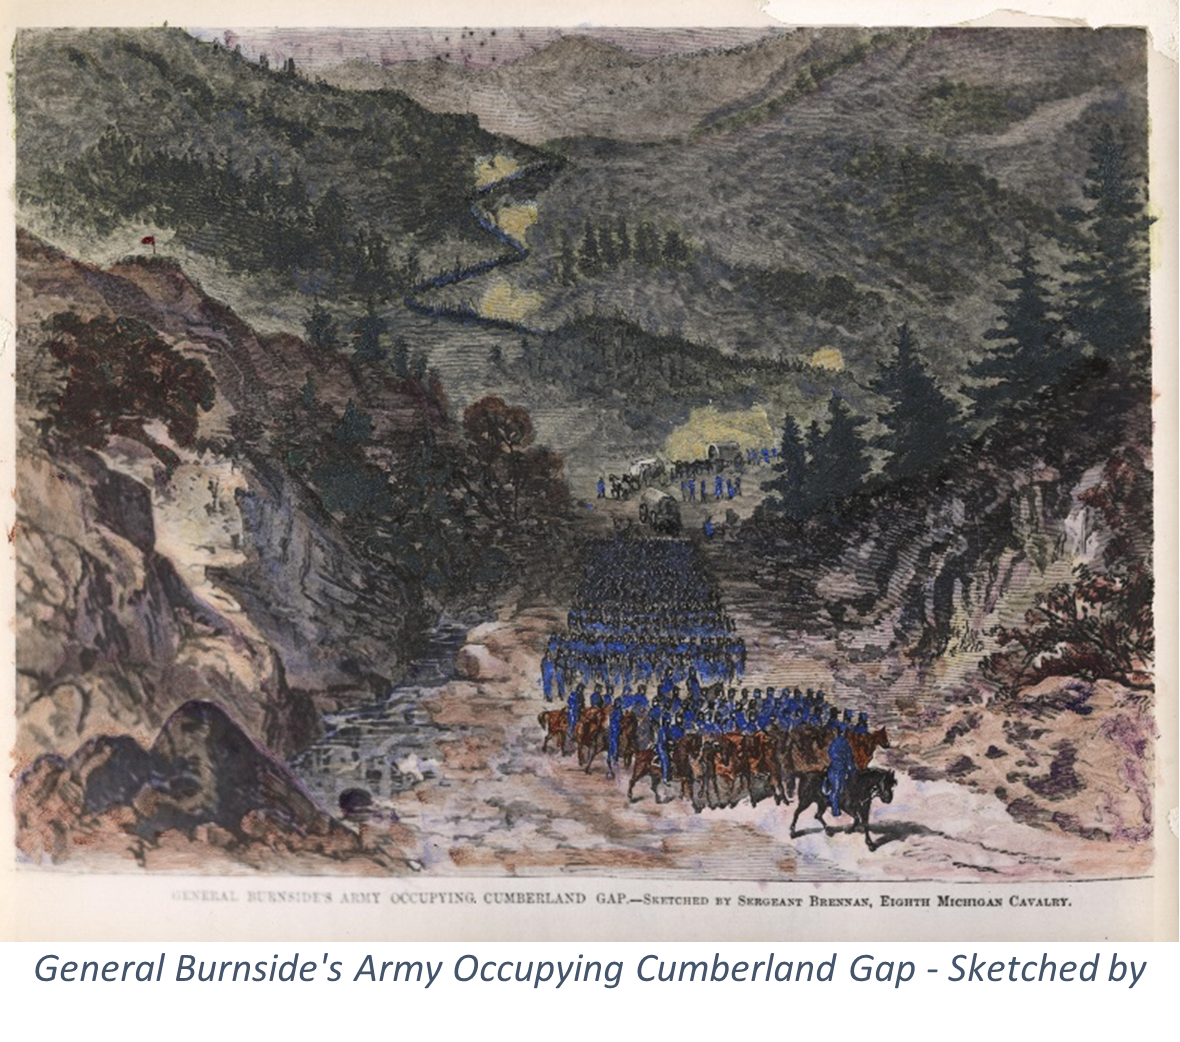 drawing showing soldiers wearing blue uniforms marching through the gap. Below it reads General Burnside's army occupying Cumberland Gap